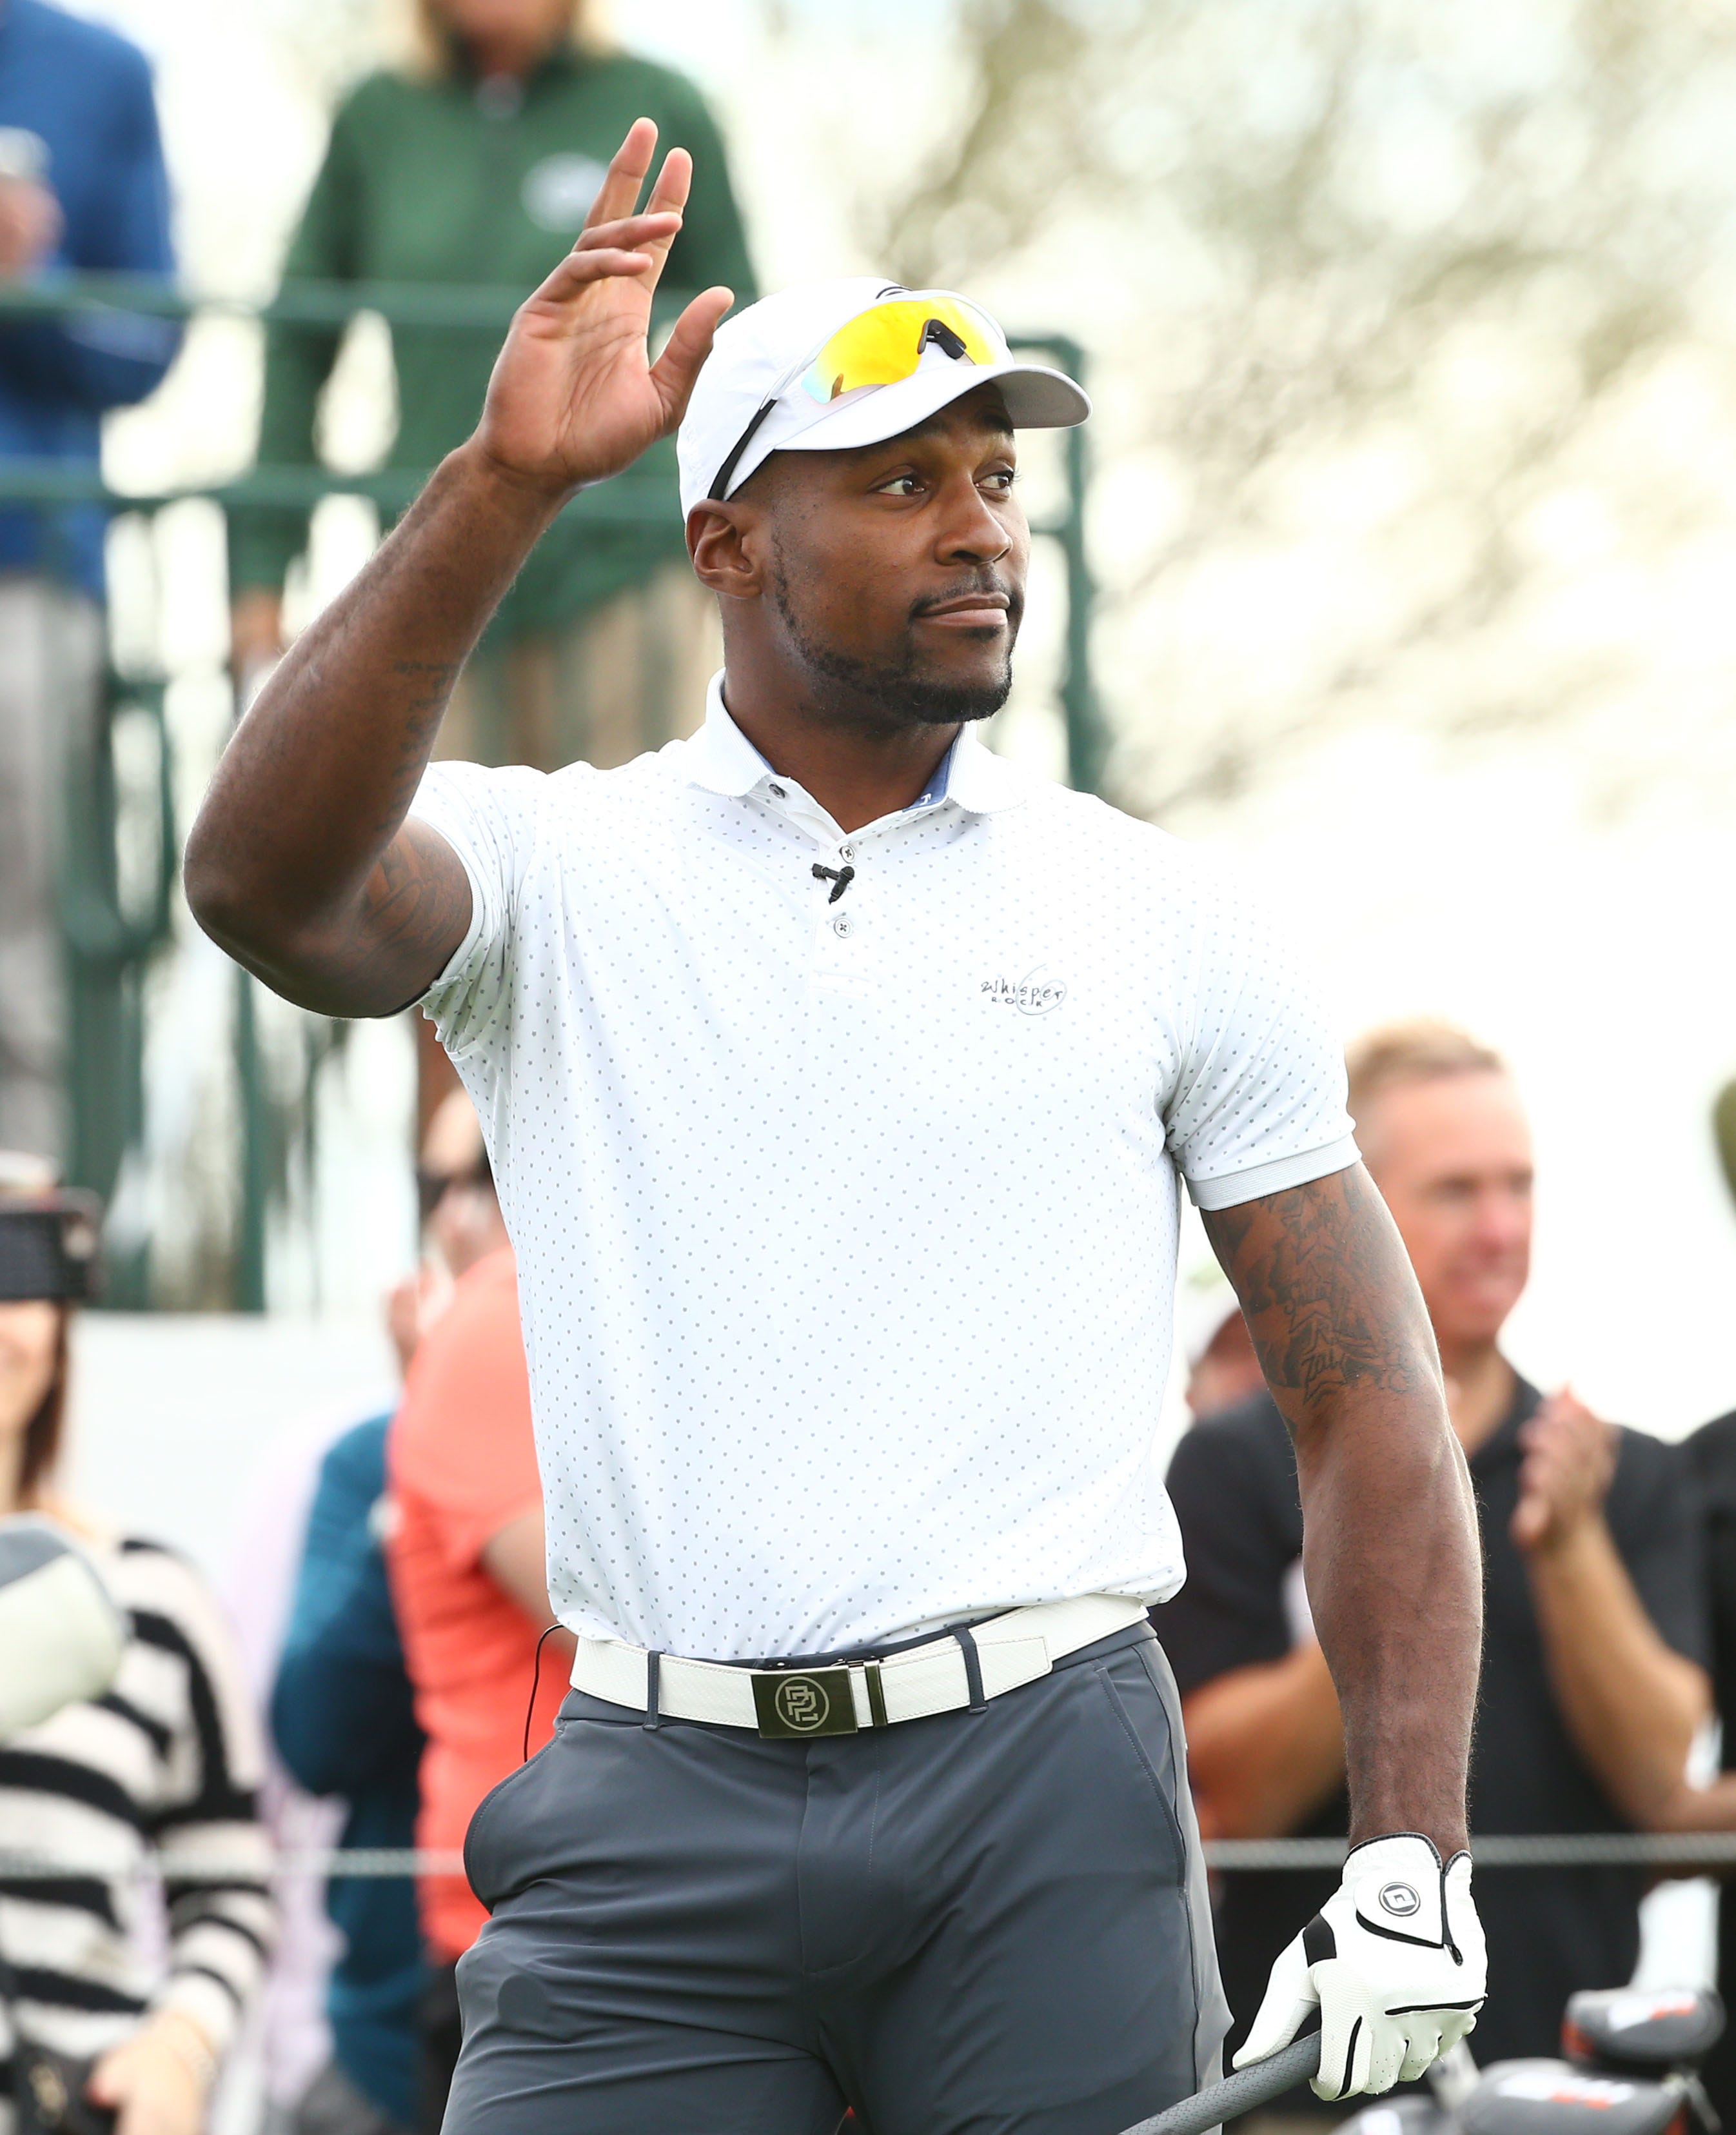 Patrick Peterson apologizes for trade demand on 16th hole at Waste Management Phoenix Open pro-am